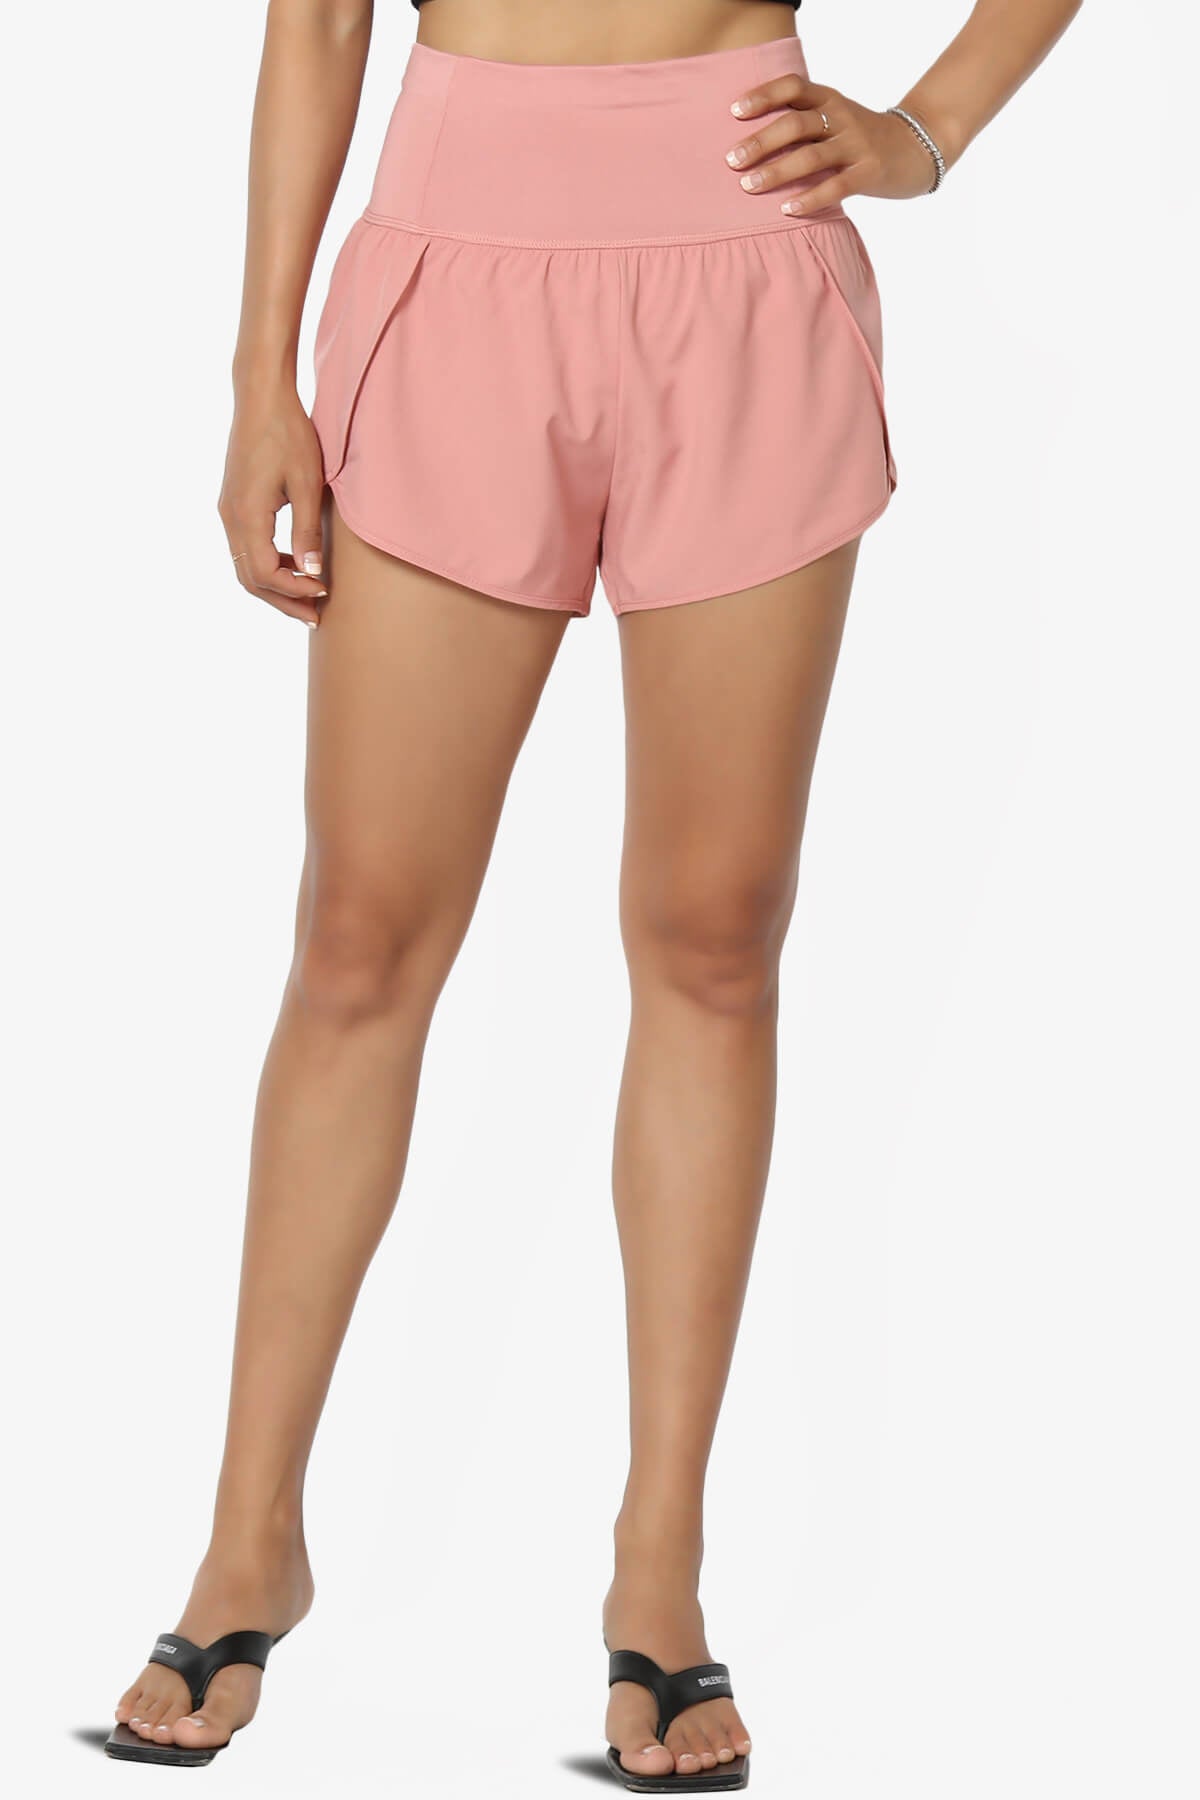 Manzie Track And Field Brief Lined Running Shorts ROSE_1